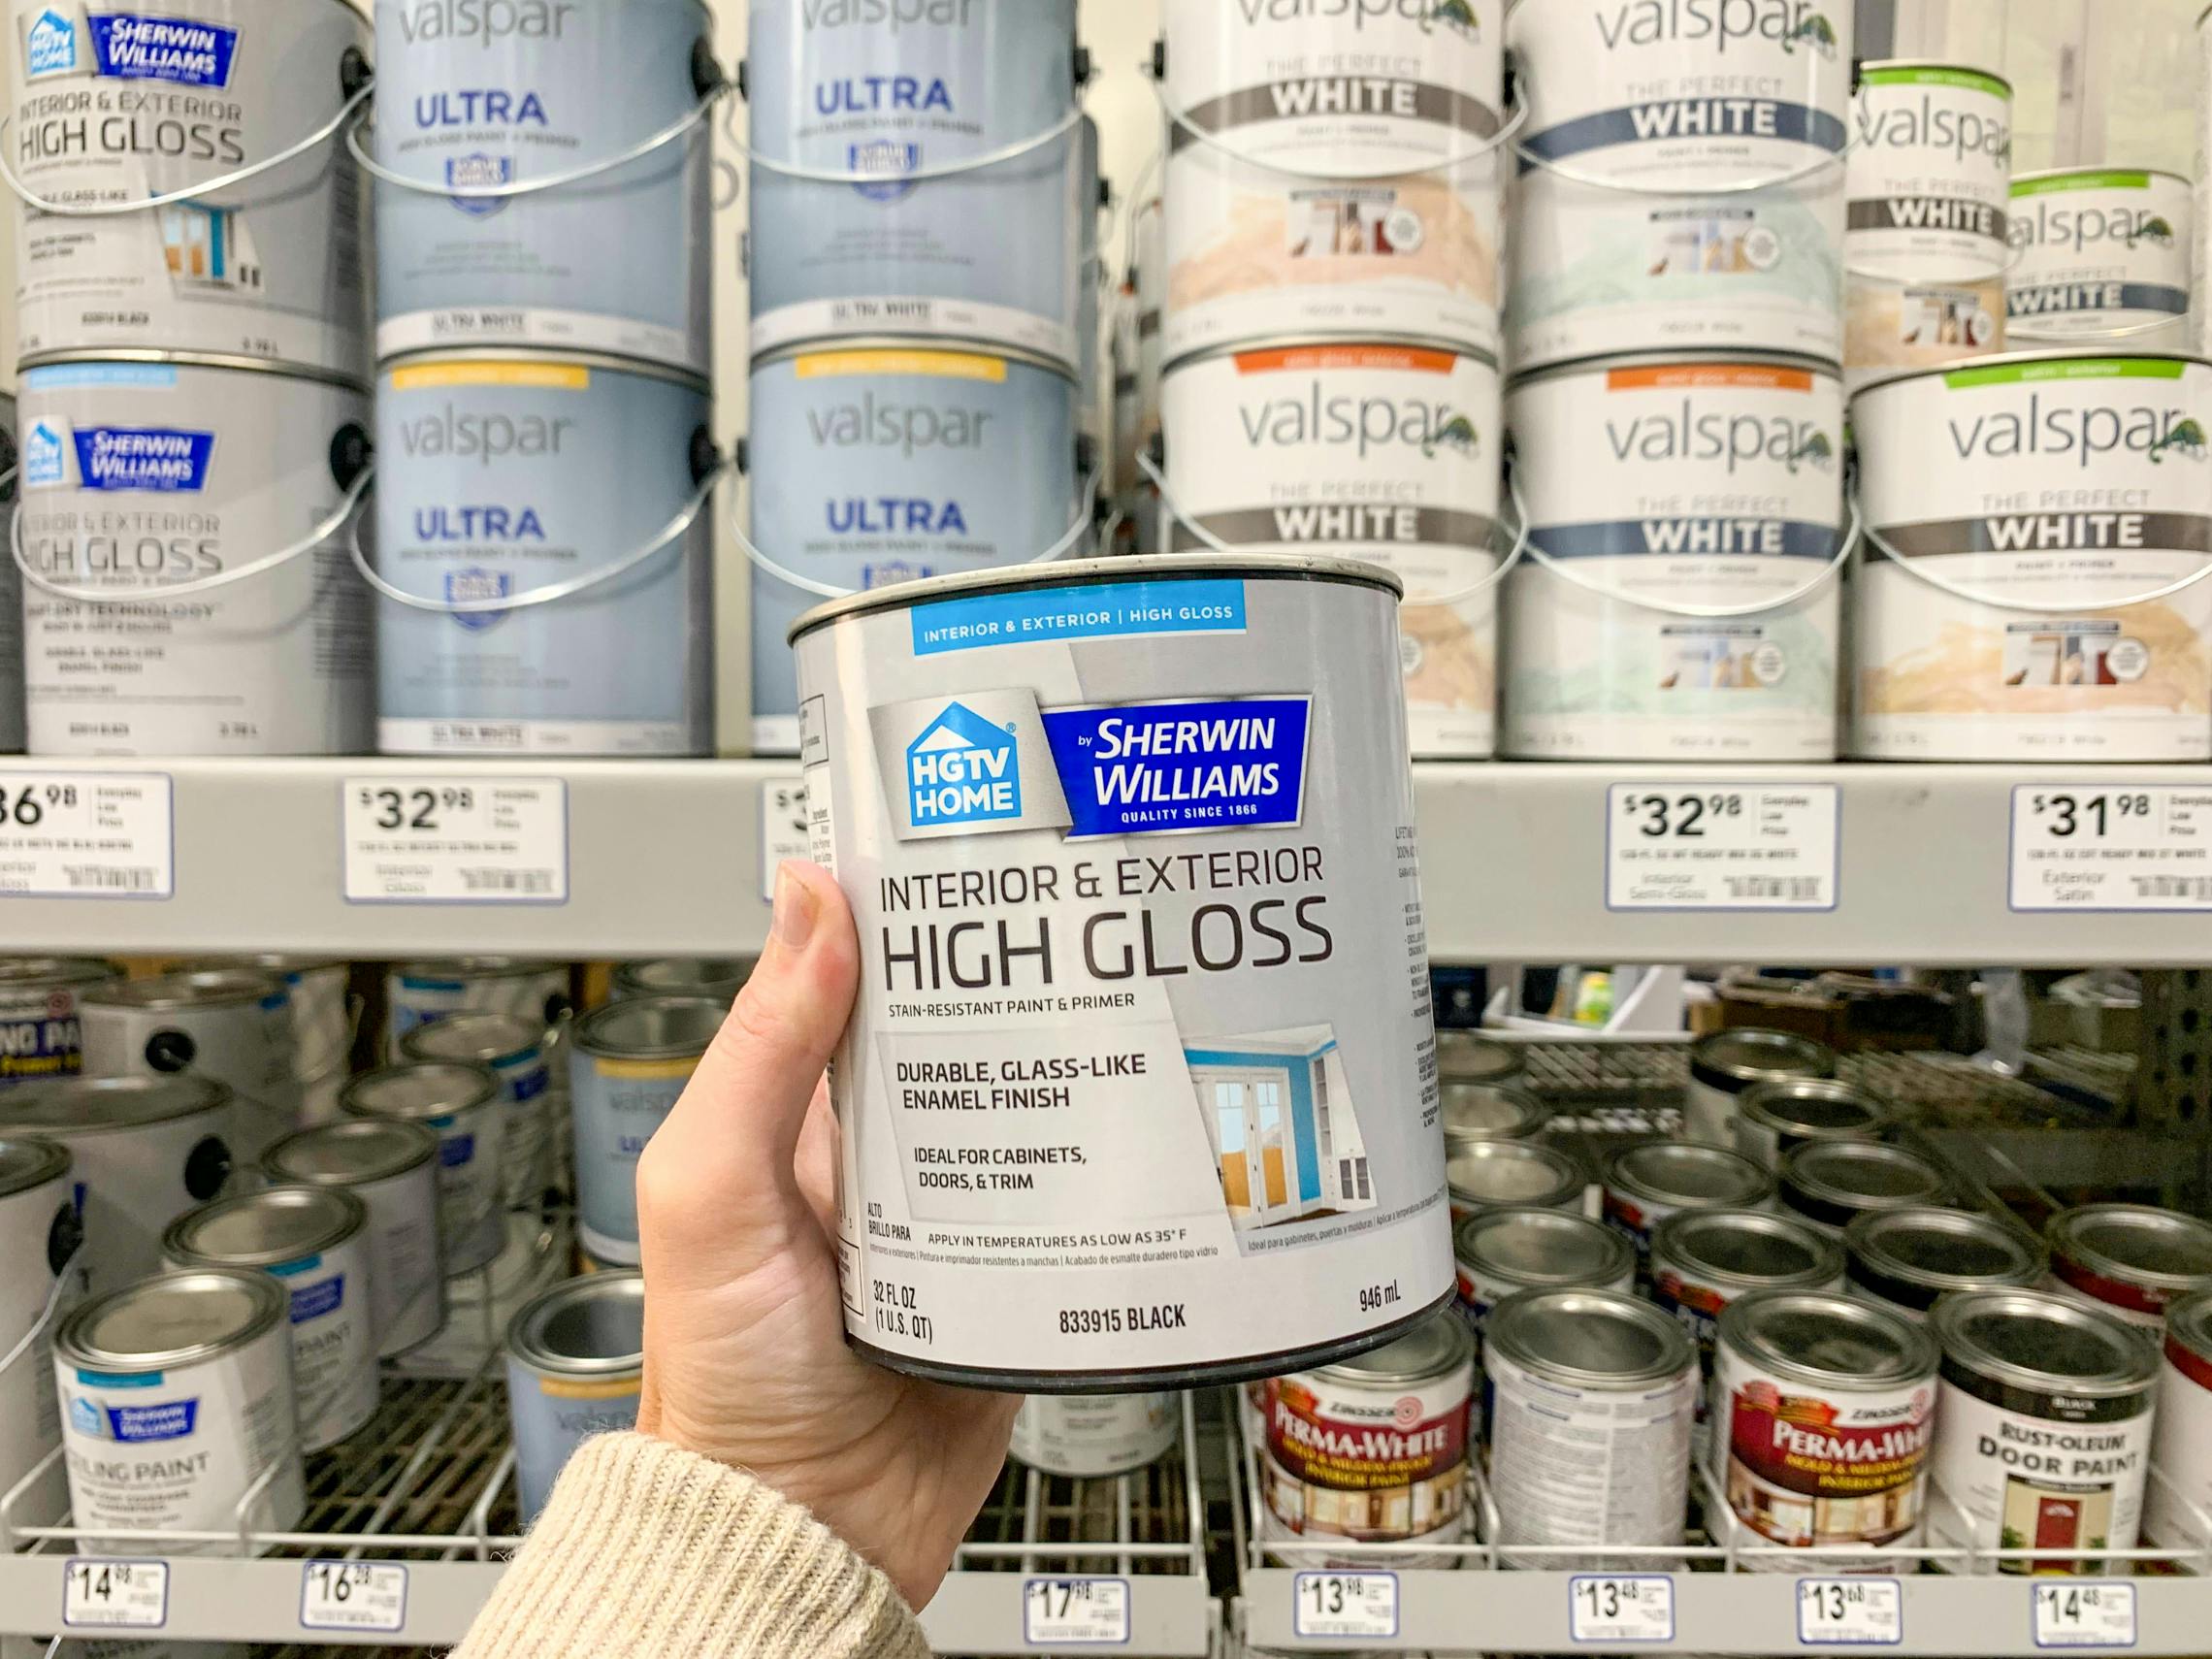 10 Best Deals And Tips For Finding Cheap Paint Near You - The Krazy Coupon Lady